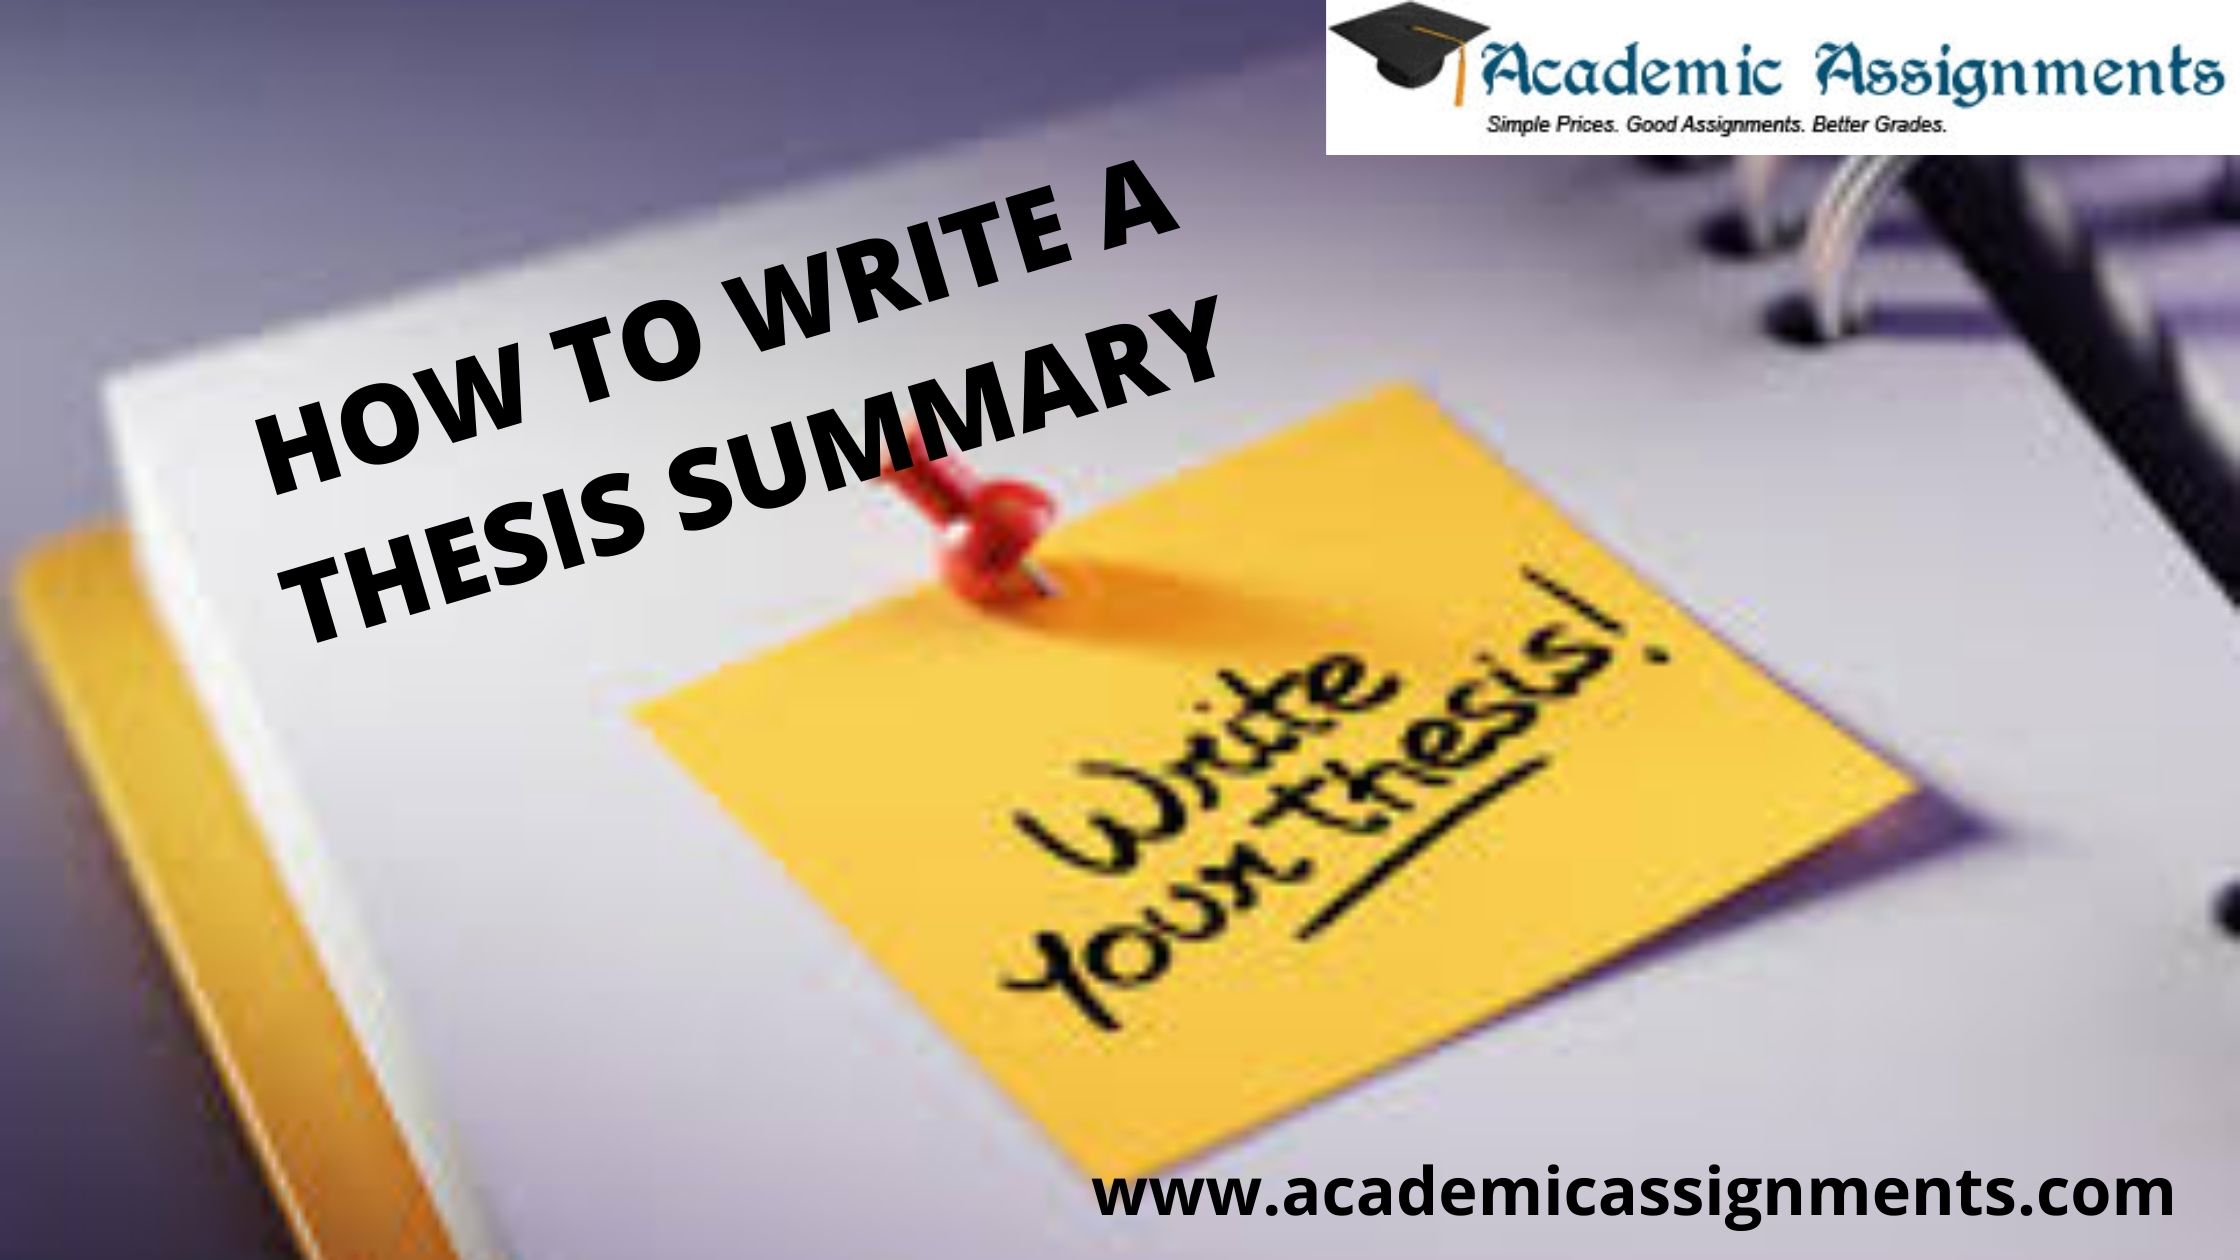 HOW TO WRITE A THESIS SUMMARY